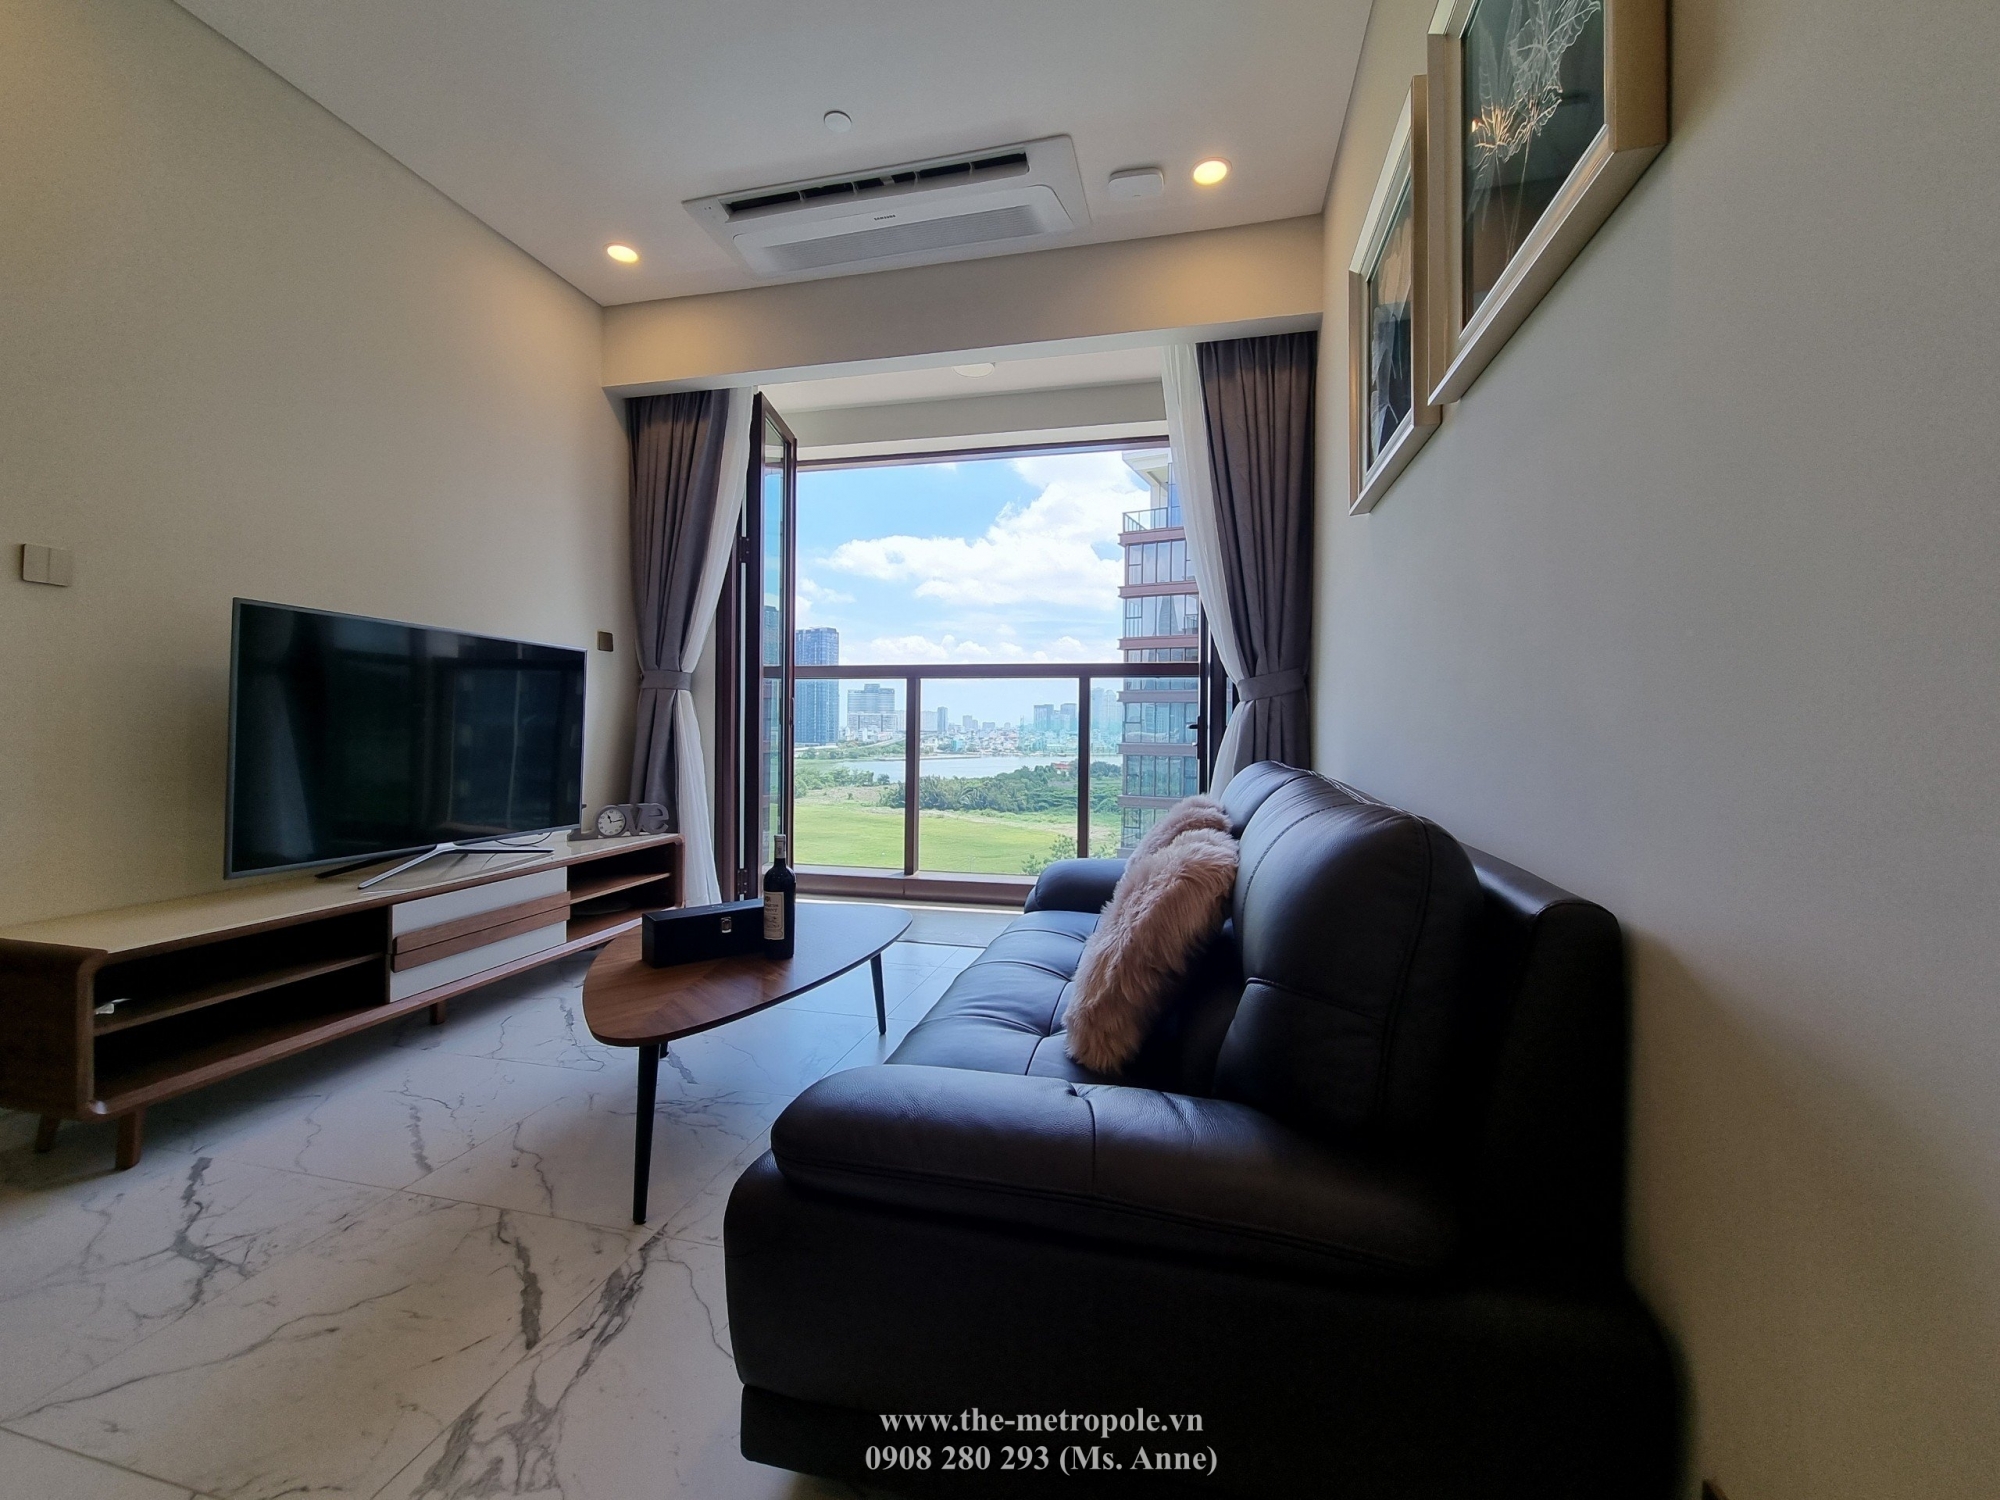 Luxury 2 bedroom apartment for sale in The Metropole Thu Thiem